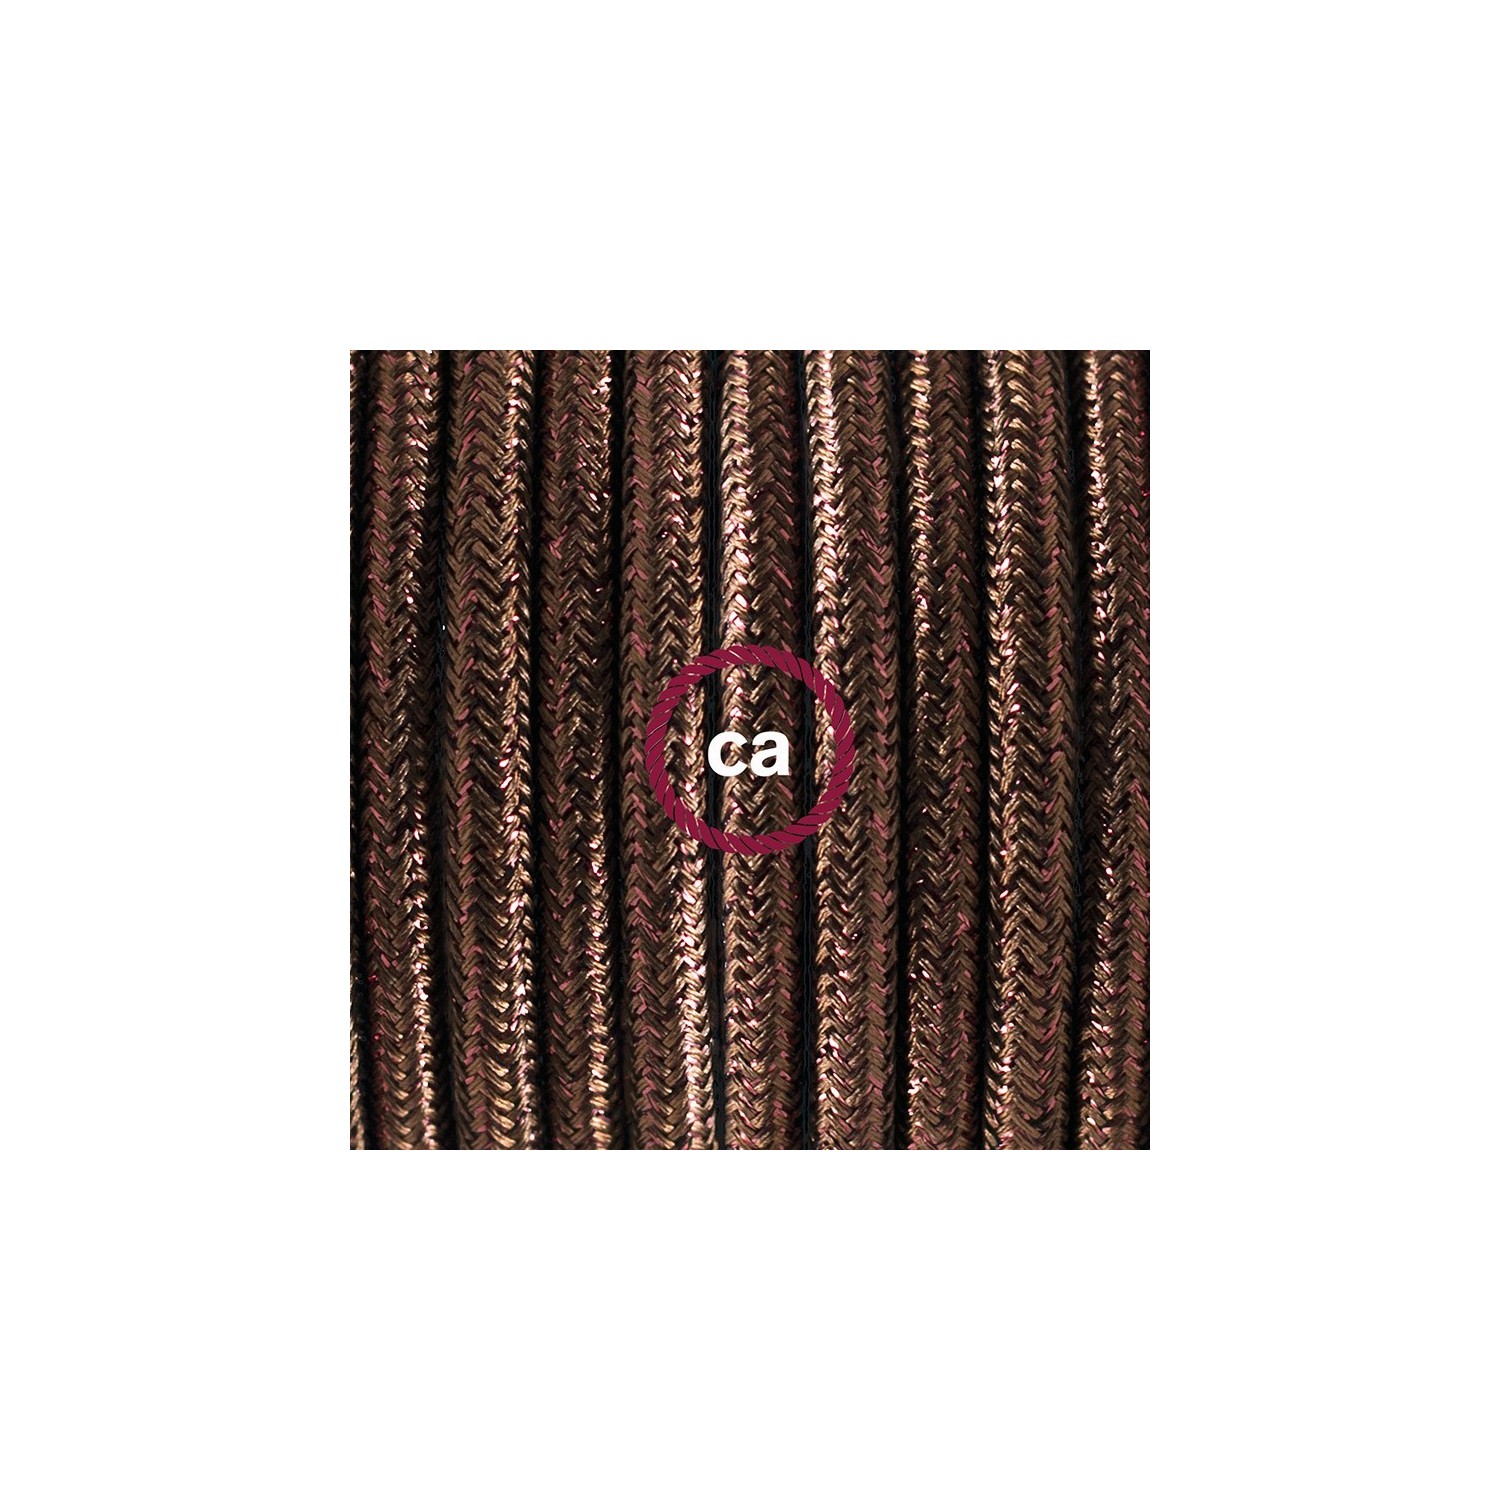 Create your RL13 Glittering Brown Snake and bring the light wherever you want.